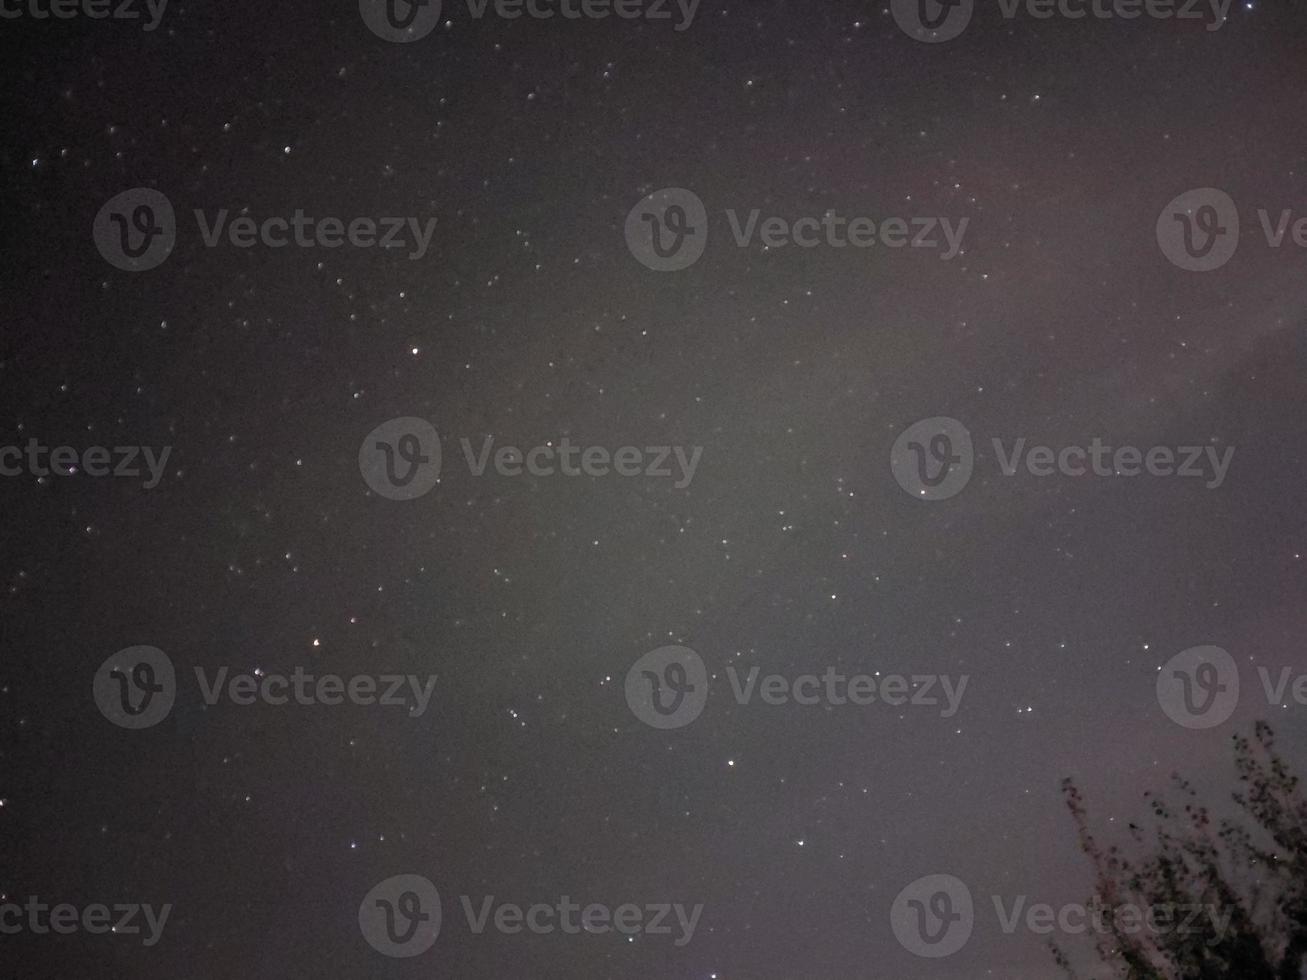 Bright night starry sky in the village photo